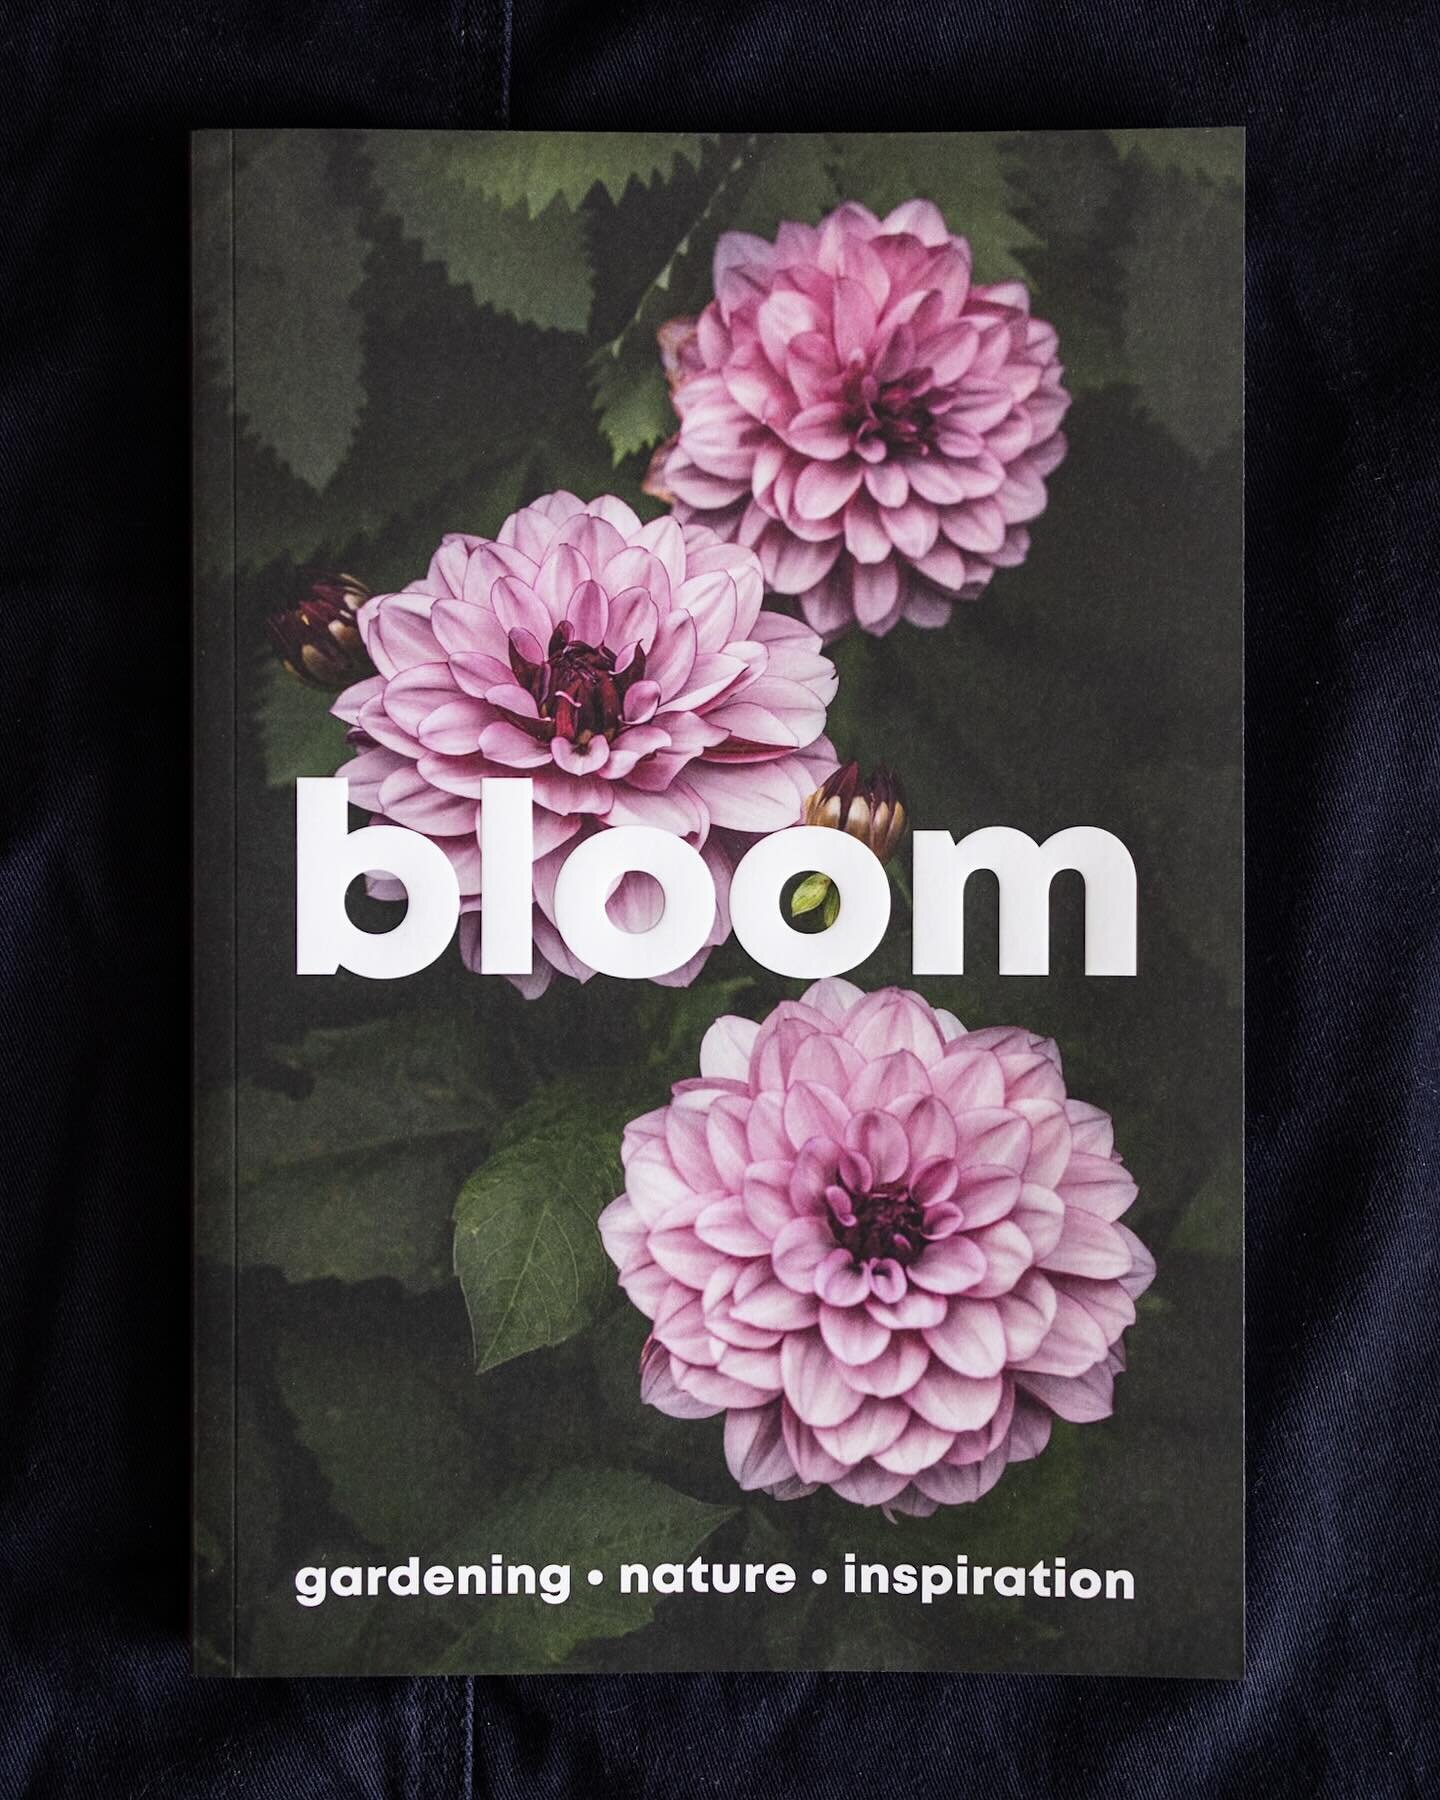 Always an honour to have any involvement with the excellent @bloom_the_magazine &mdash; this cover shot on the latest issue is of Dahlia &lsquo;Cr&egrave;me de Cassis&rsquo;, expertly grown by @harrietrycroft (plus a nice view of Harriet&rsquo;s gard